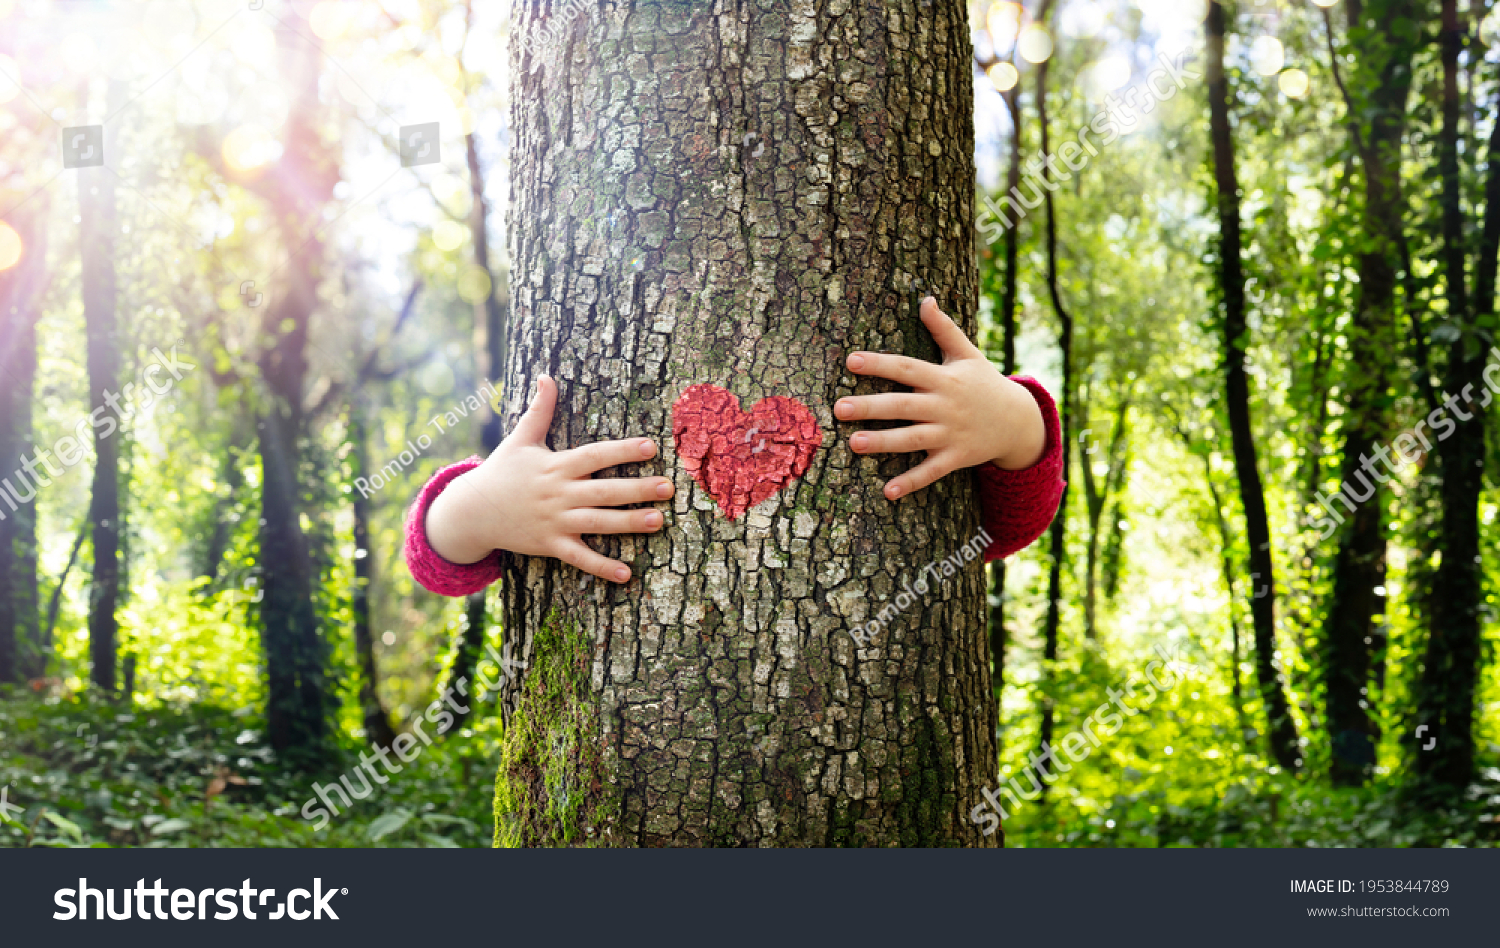 Tree Hugging - Love Nature - Child Hug The Trunk With Red Heart Shape #1953844789